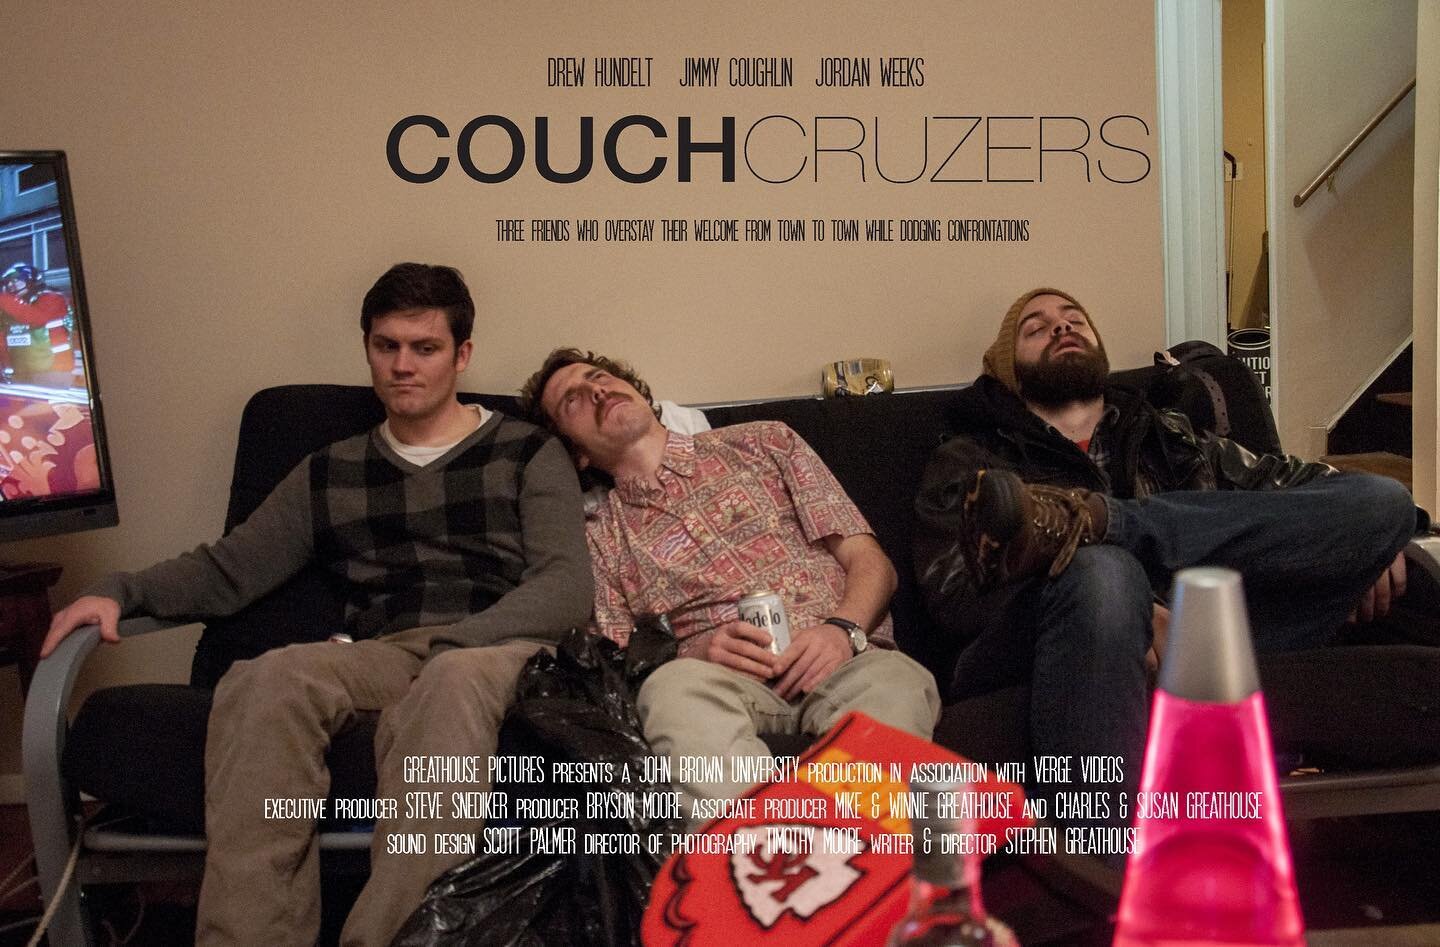 If your in St Louis and work in the commercial/narrative film Industry I'd love to invite you to the private premiere of my TV Pilot, CouchCRUZERS. The event starts at 6:30p with drinks, popcorn, and fun with my new RED V-Raptor! We'll be at the Gasl